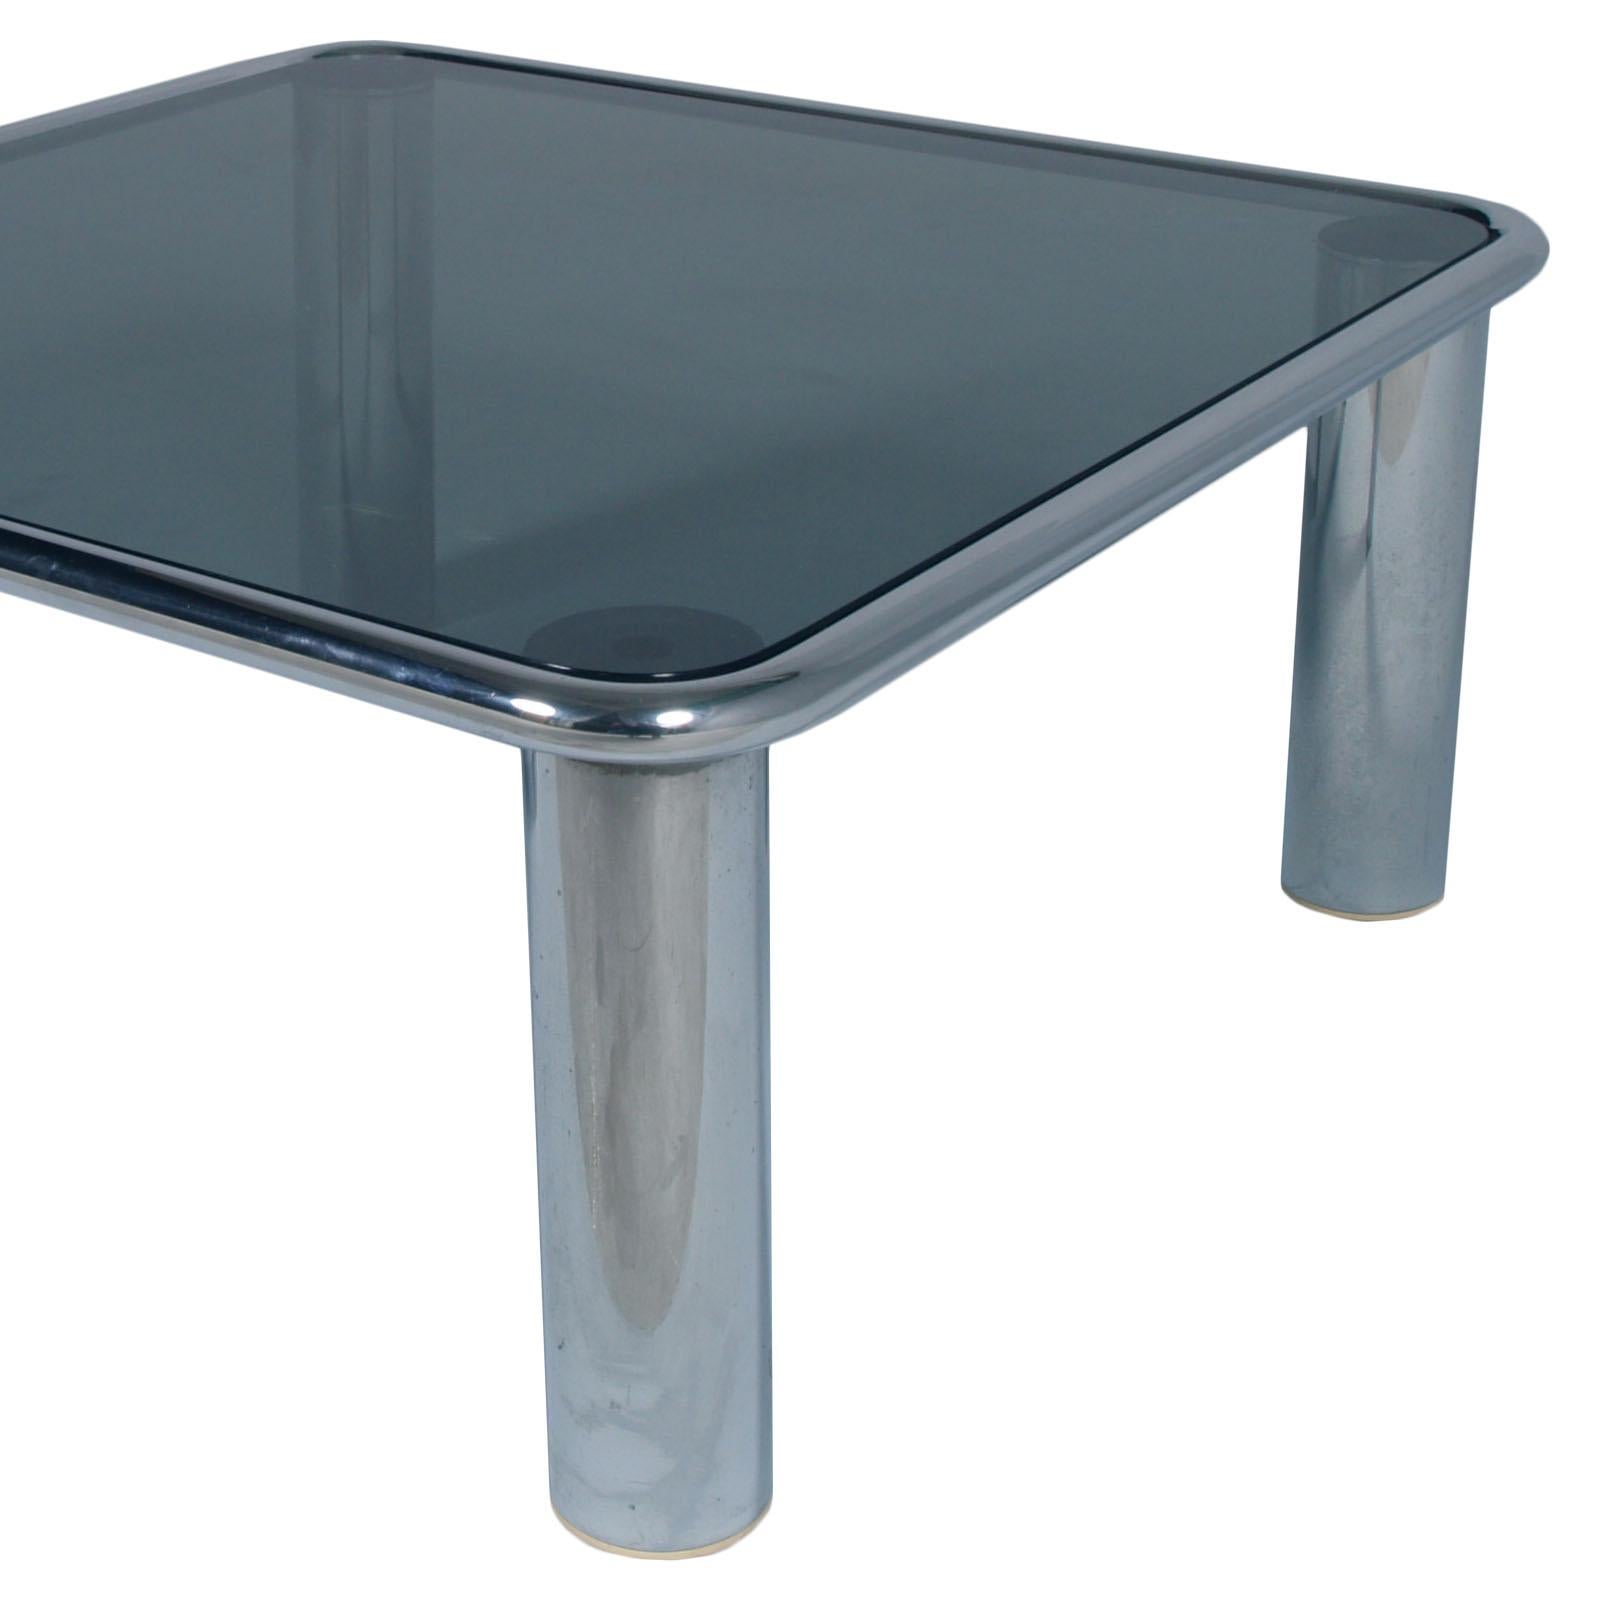 Galvanized Mid-Century Modern Chrome Coffee Table Glass Fumè Top by G. Frattini for Cassina For Sale